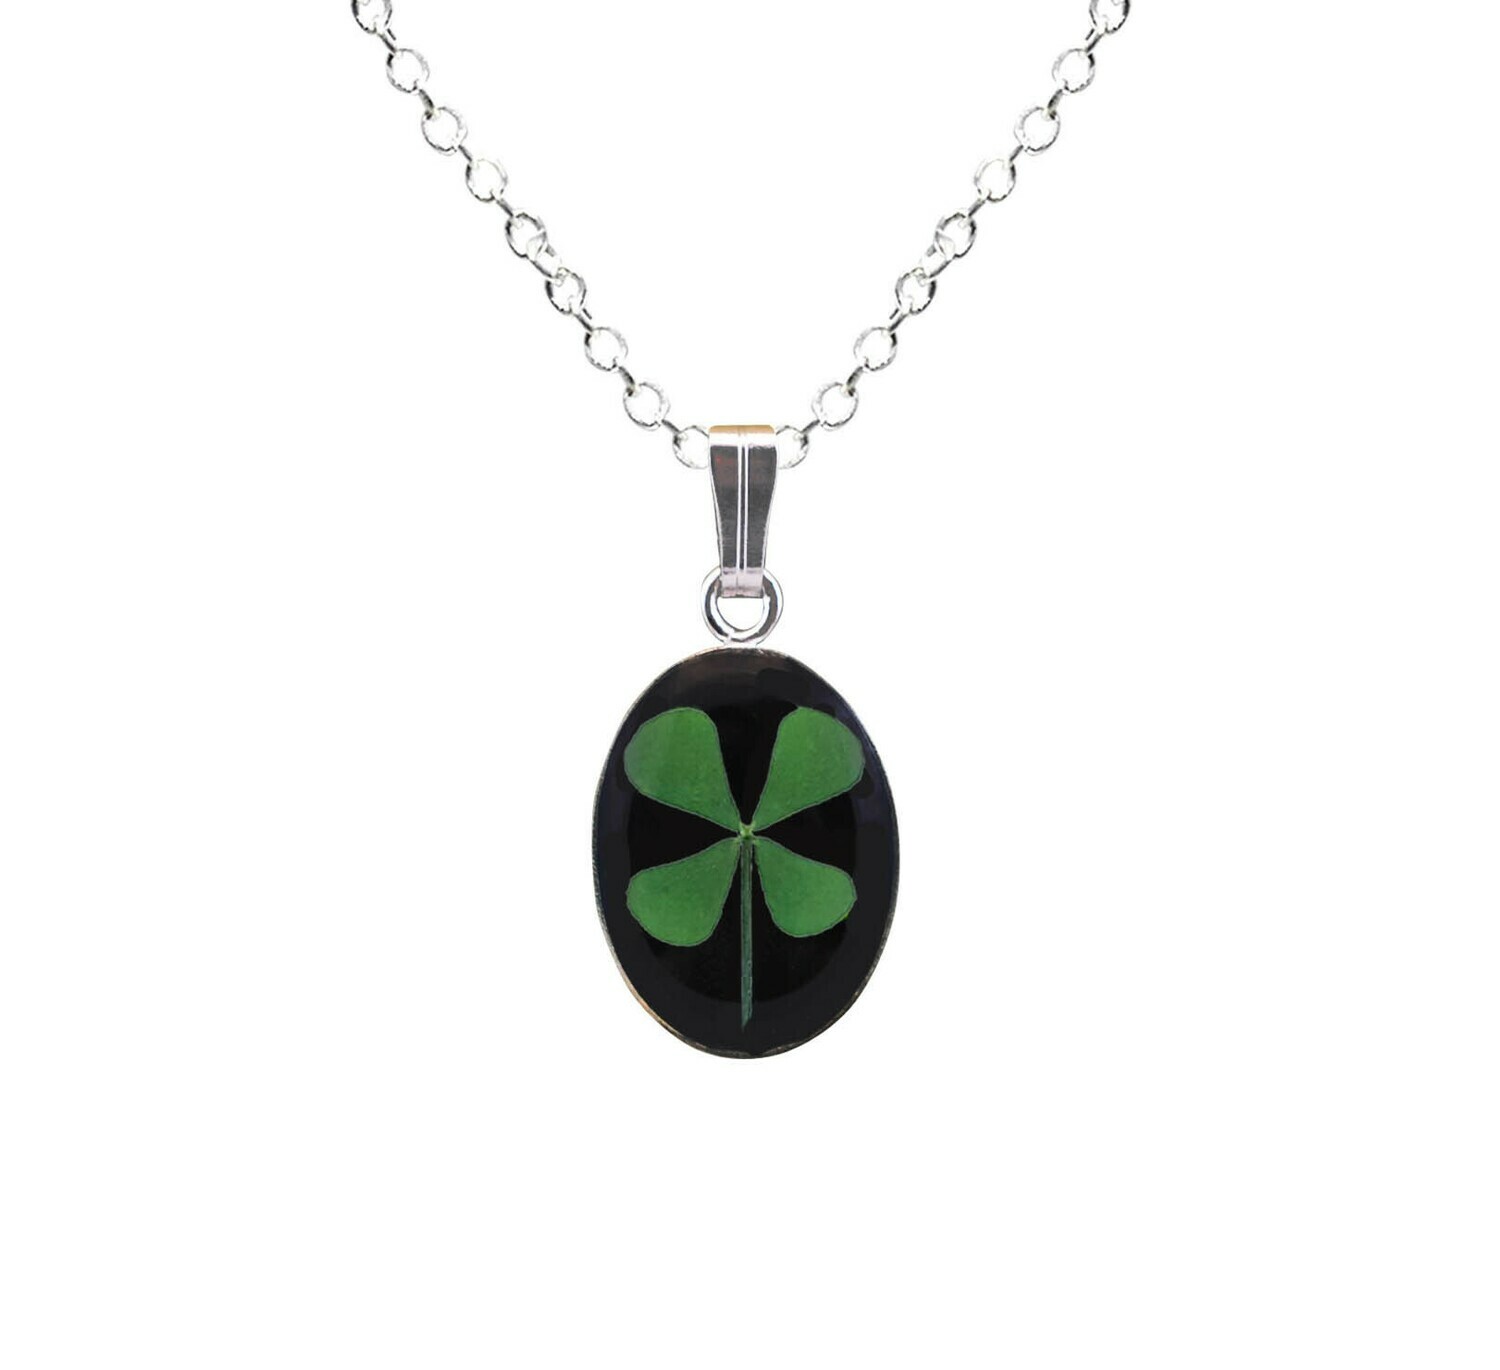 Clover Necklace, Small Oval, Black Background